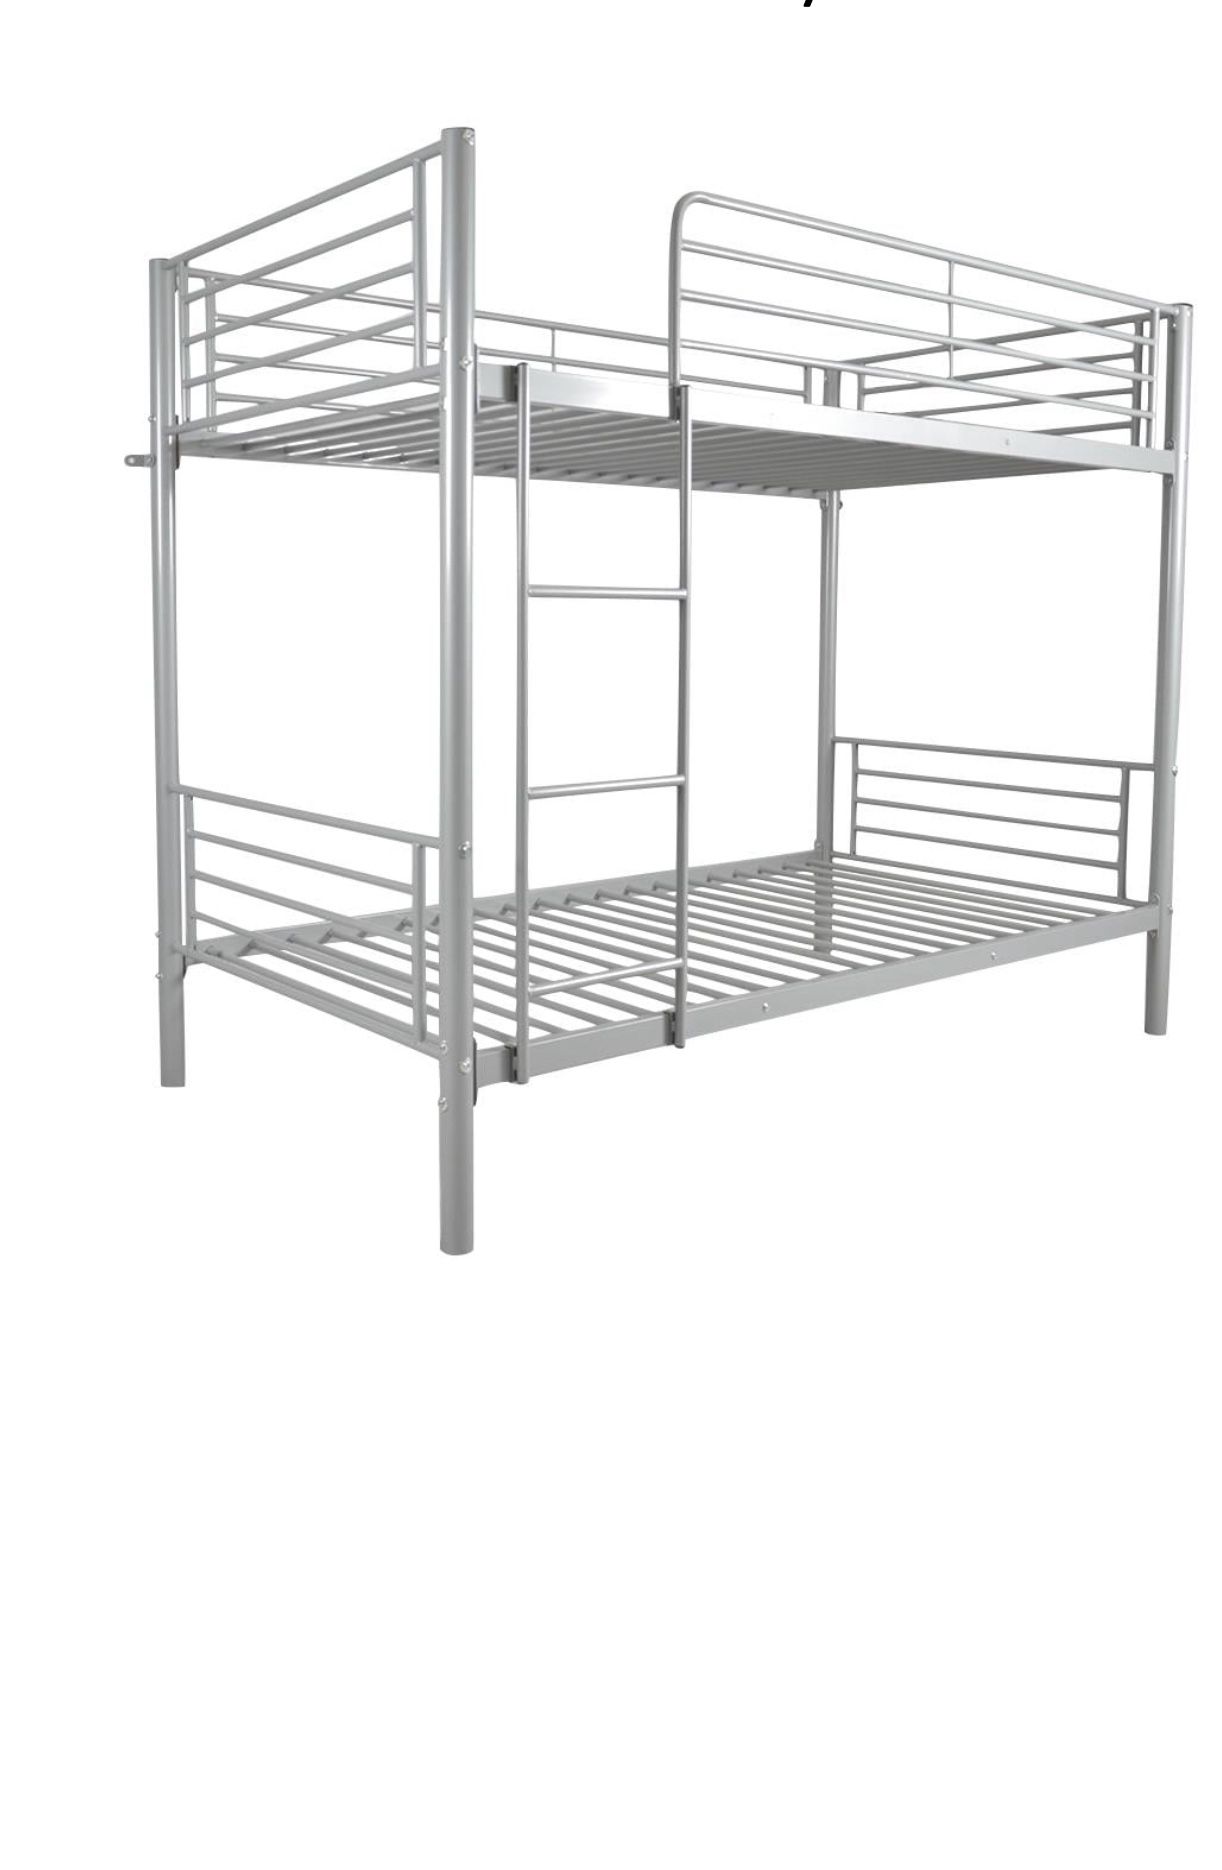 Grey Metal Bunk Beds - Sturdy and Stylish